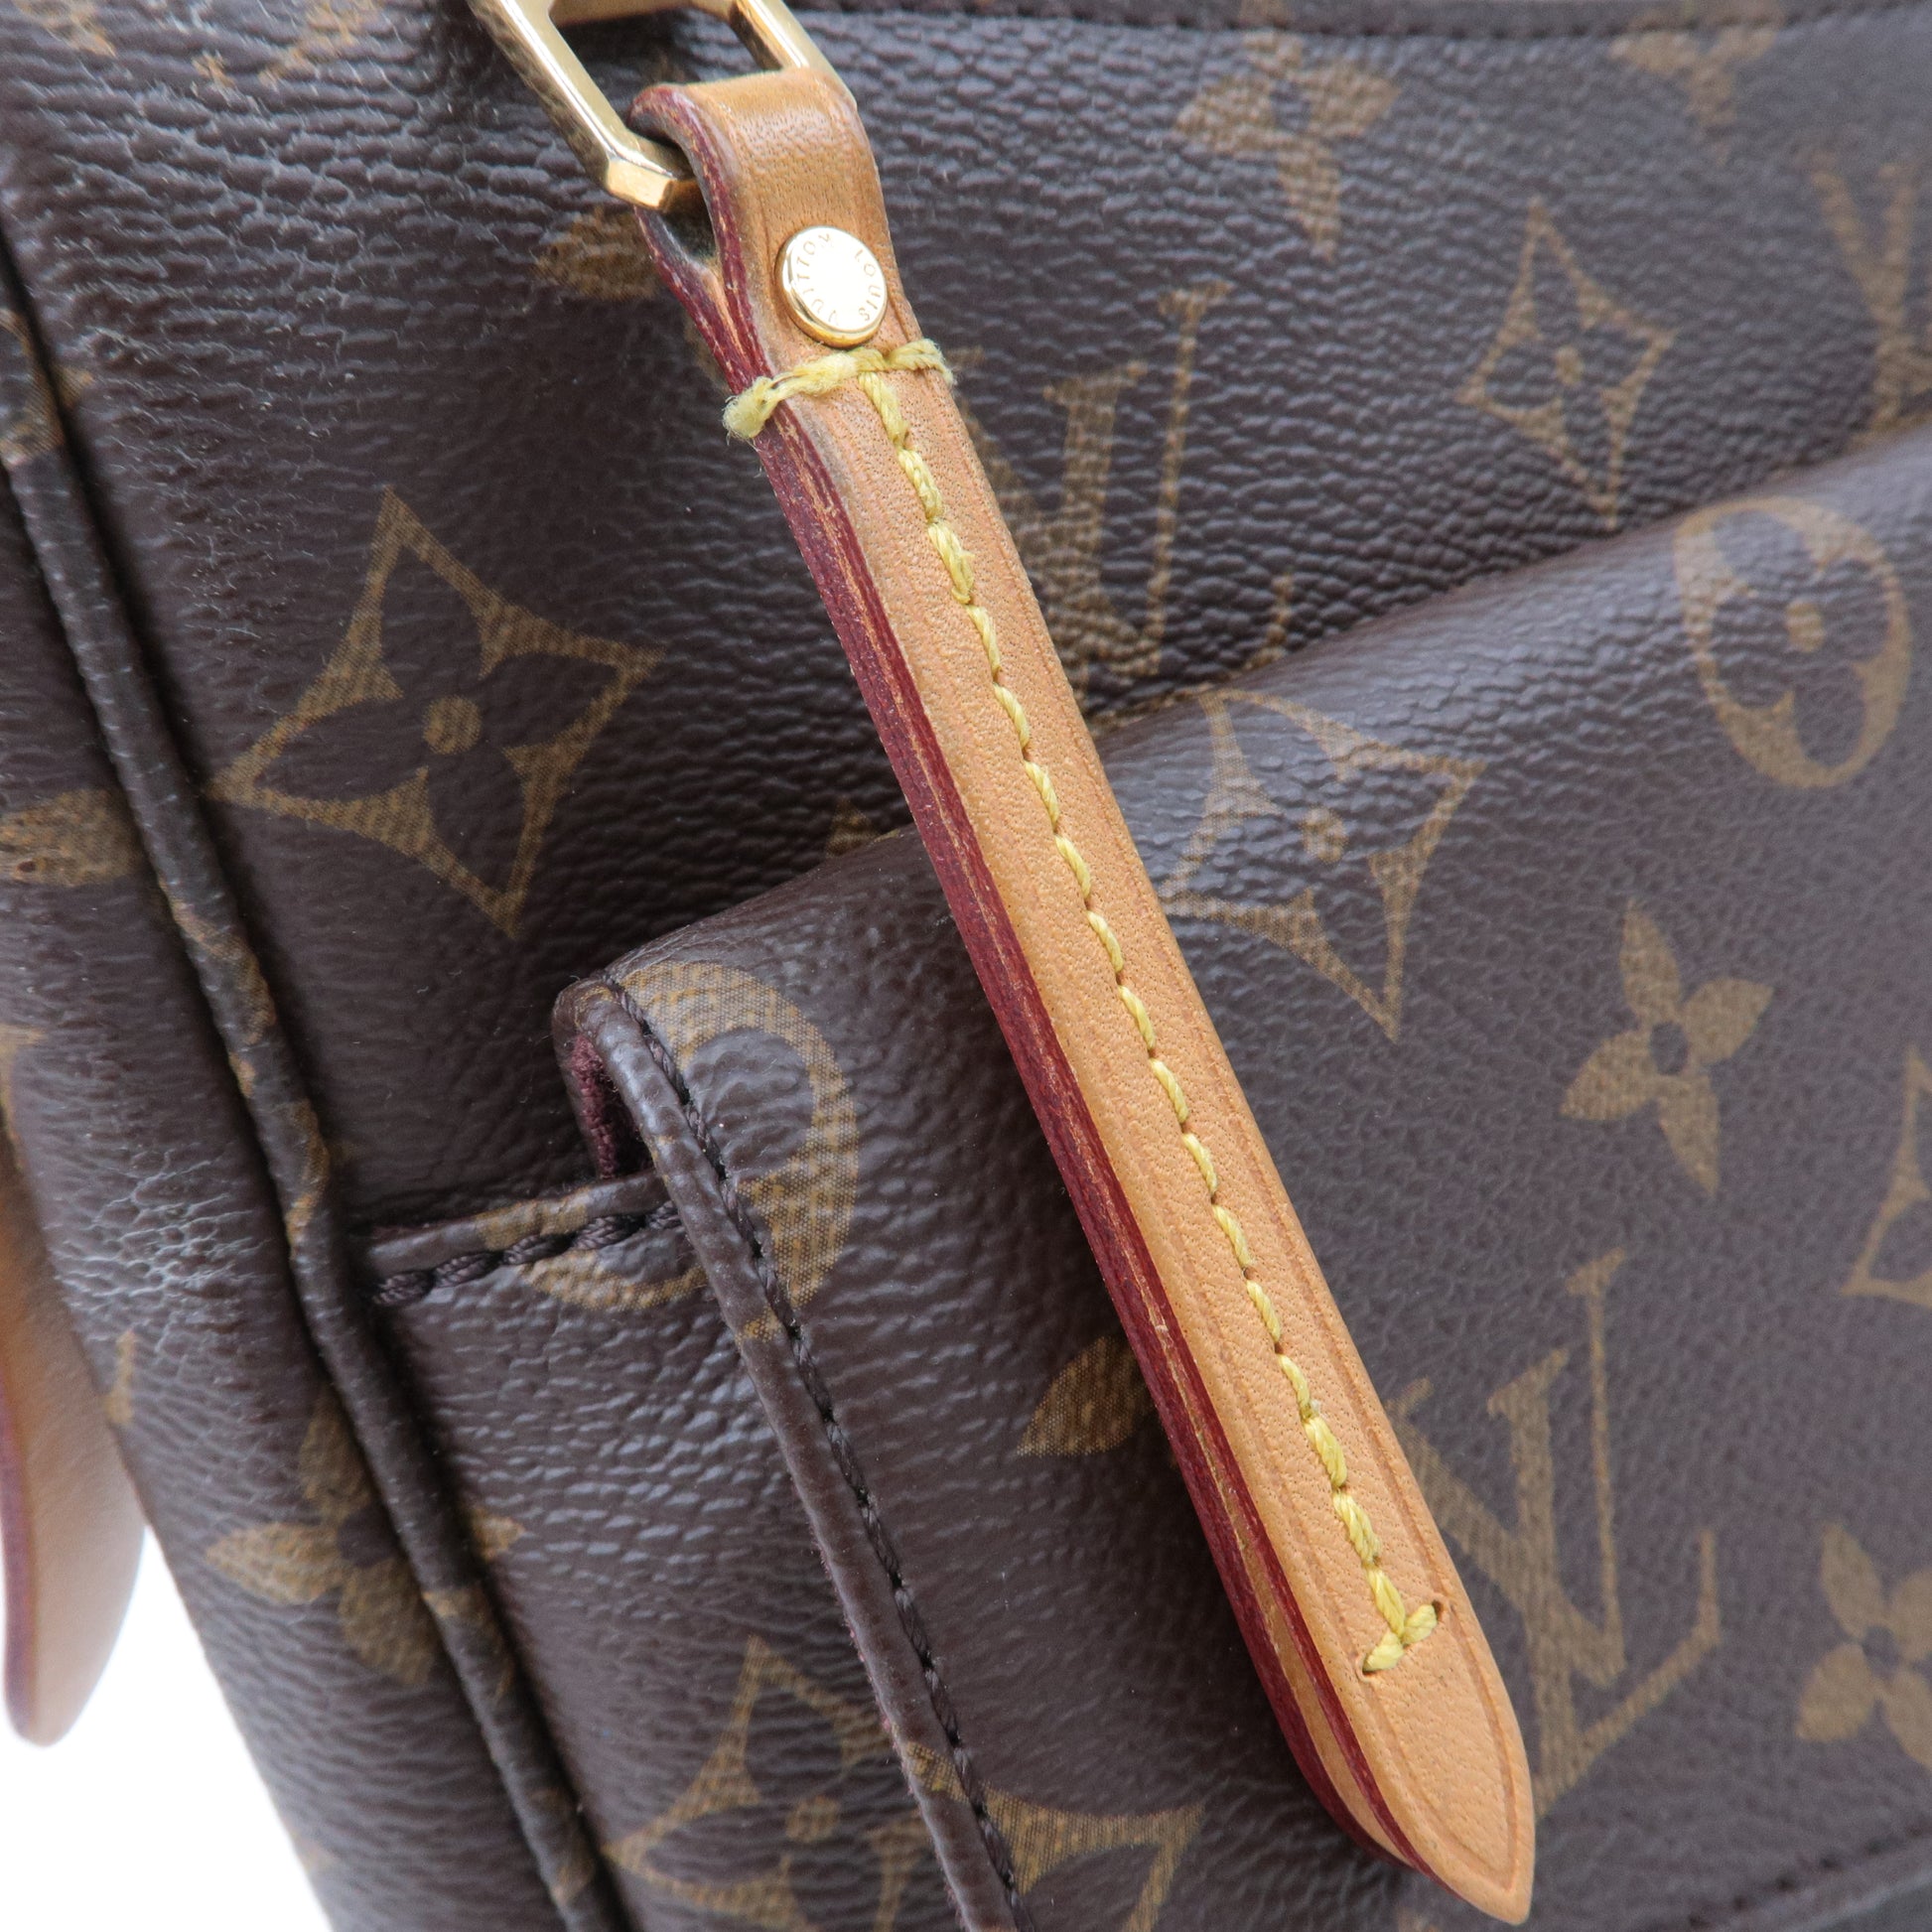 Don't Buy The Louis Vuitton Cite Bag Until You've Watched This